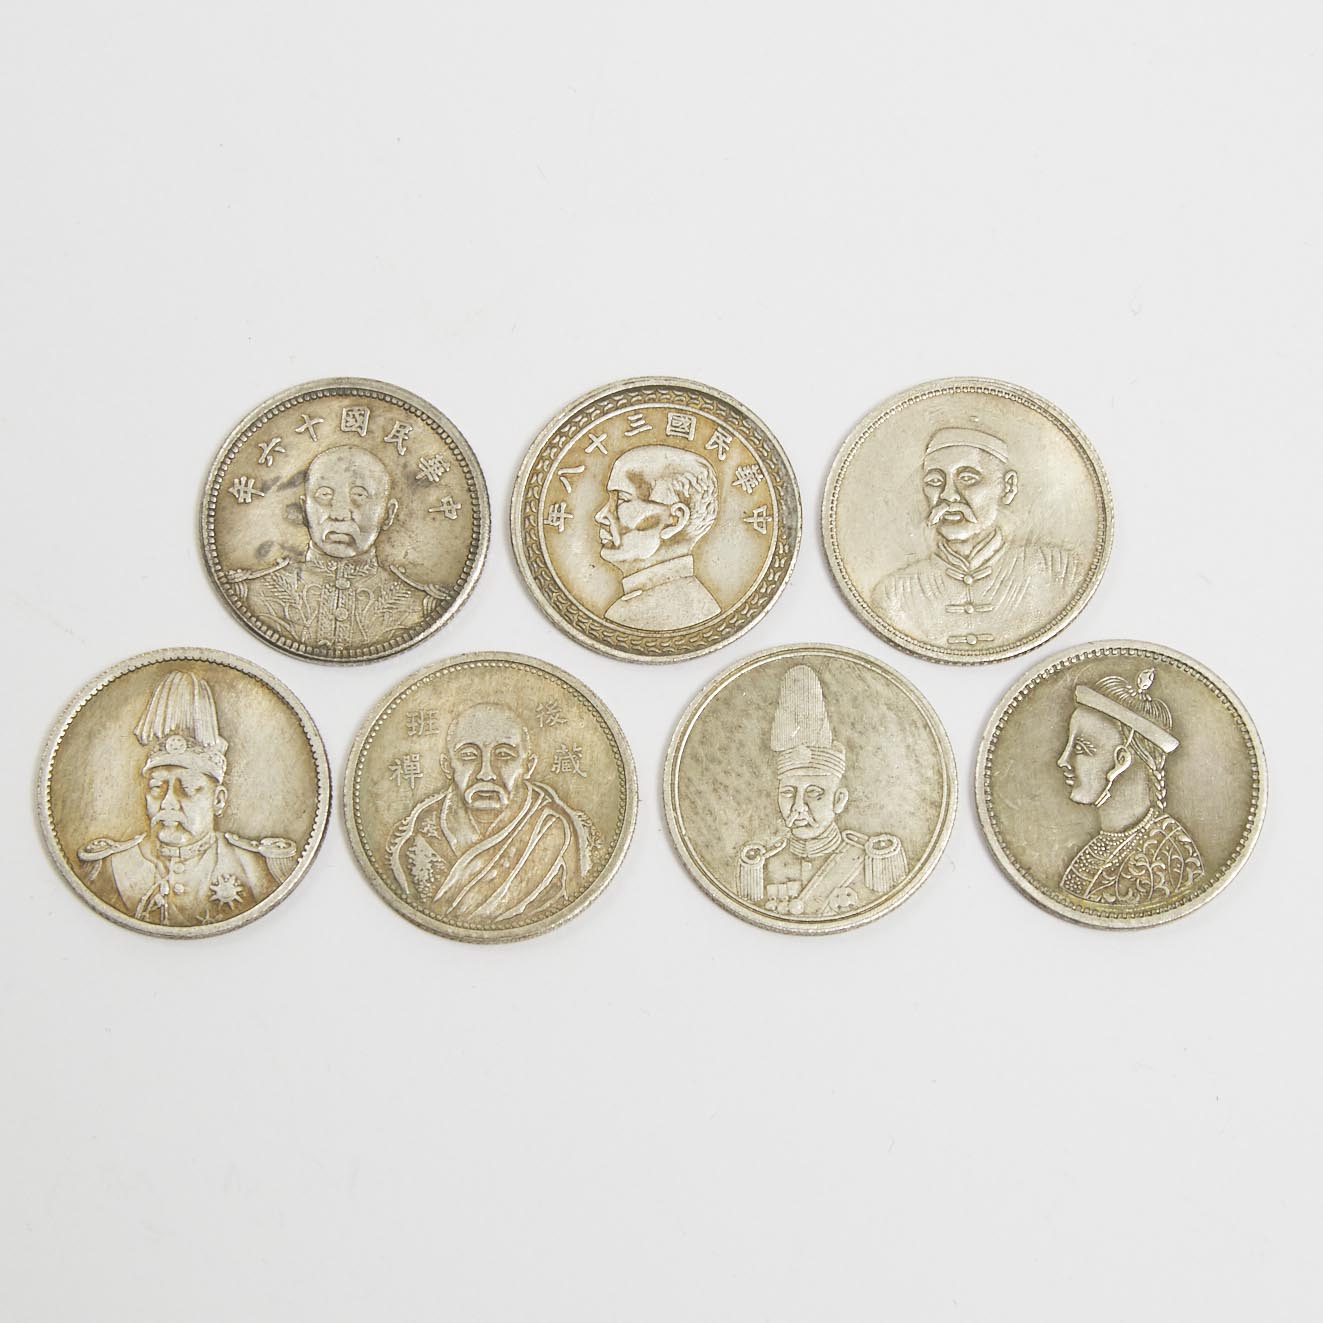 Seven Chinese Silver Coins, Late Qing/Republican Period Marks